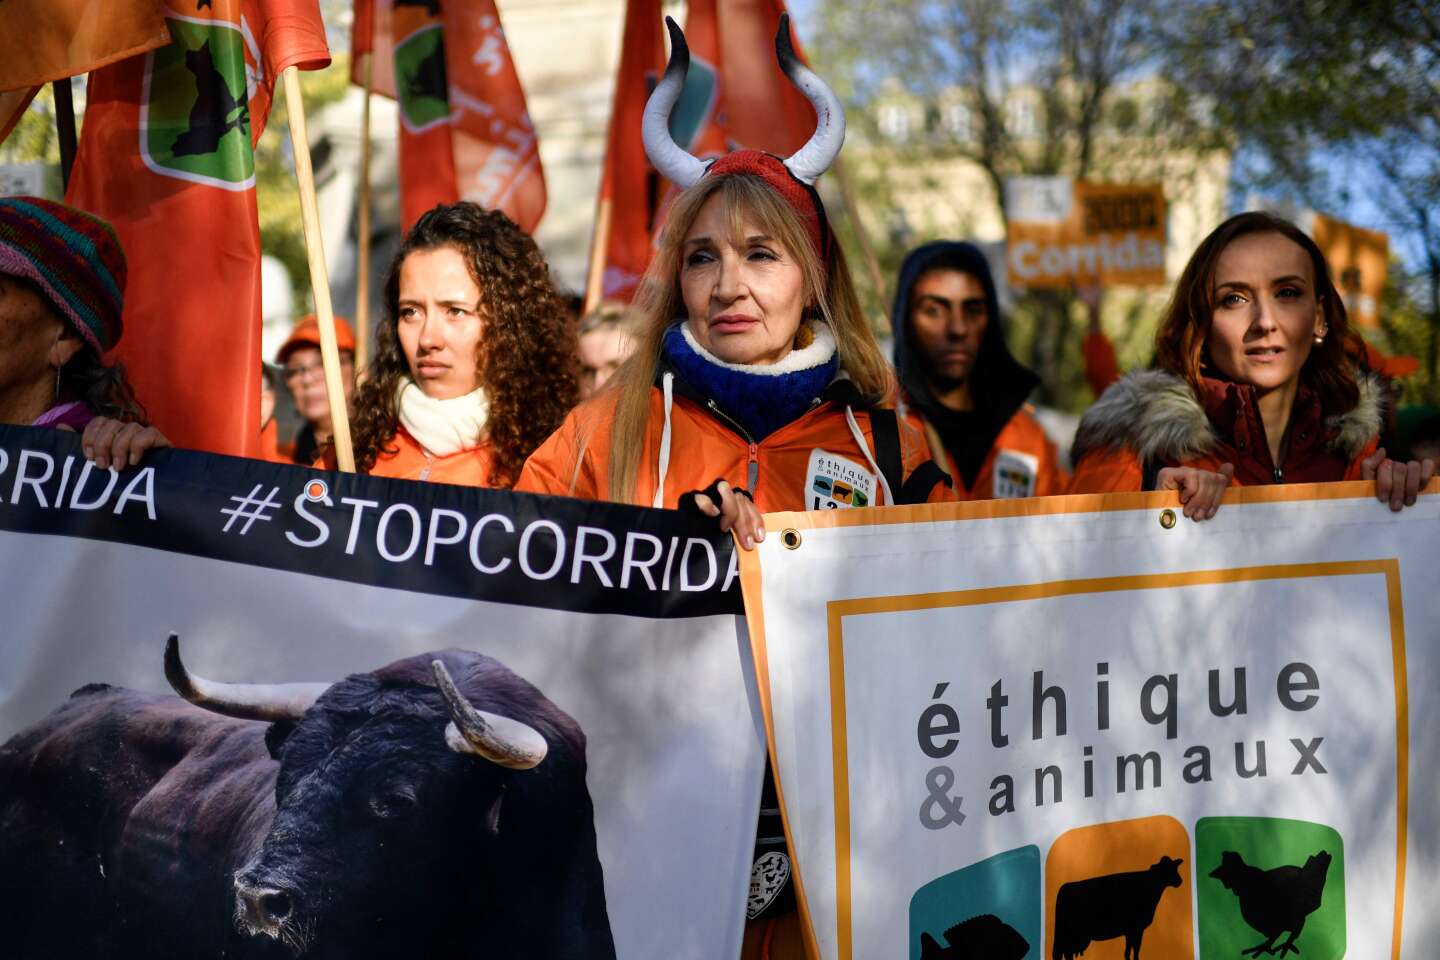 Animal rights today demonstrates a growing democratic deficit'